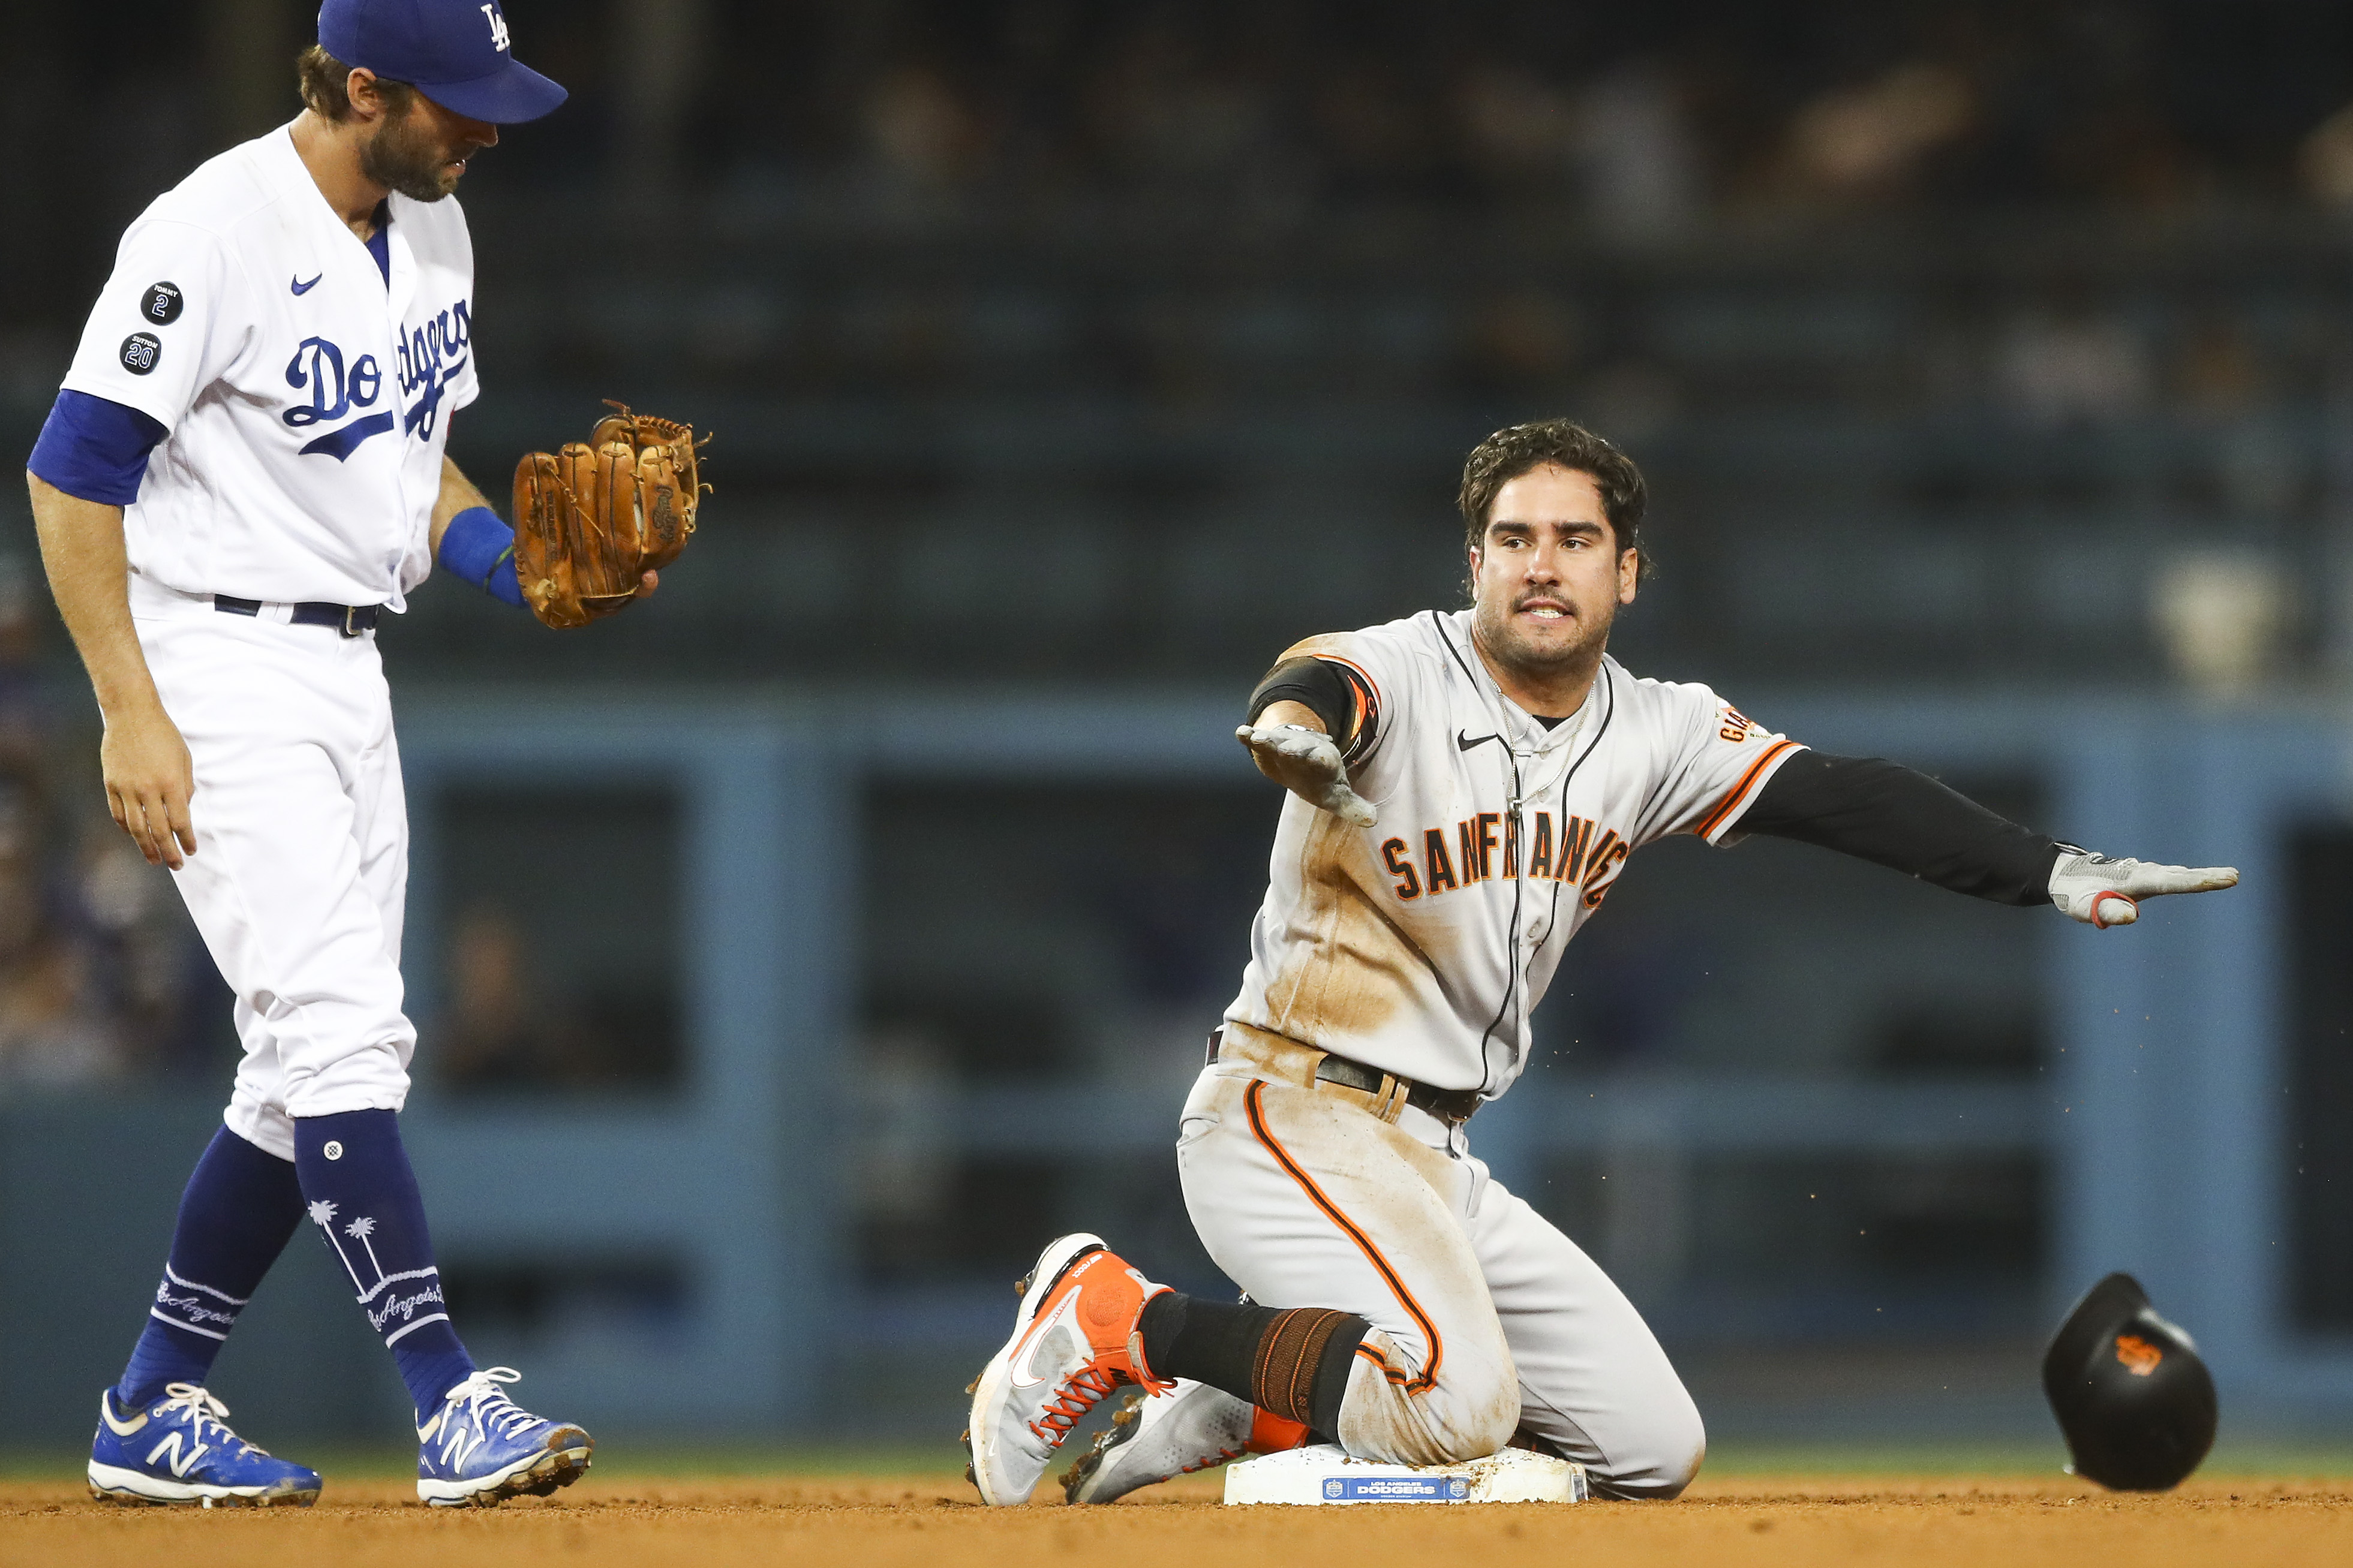 Mike Tauchman of the San Francisco Giants argues the call against him as he is tagged out by Chris Taylor of the Los Angeles Dodgers at second base in the ninth inning at Dodger Stadium on June 28, 2021 in Los Angeles, California.